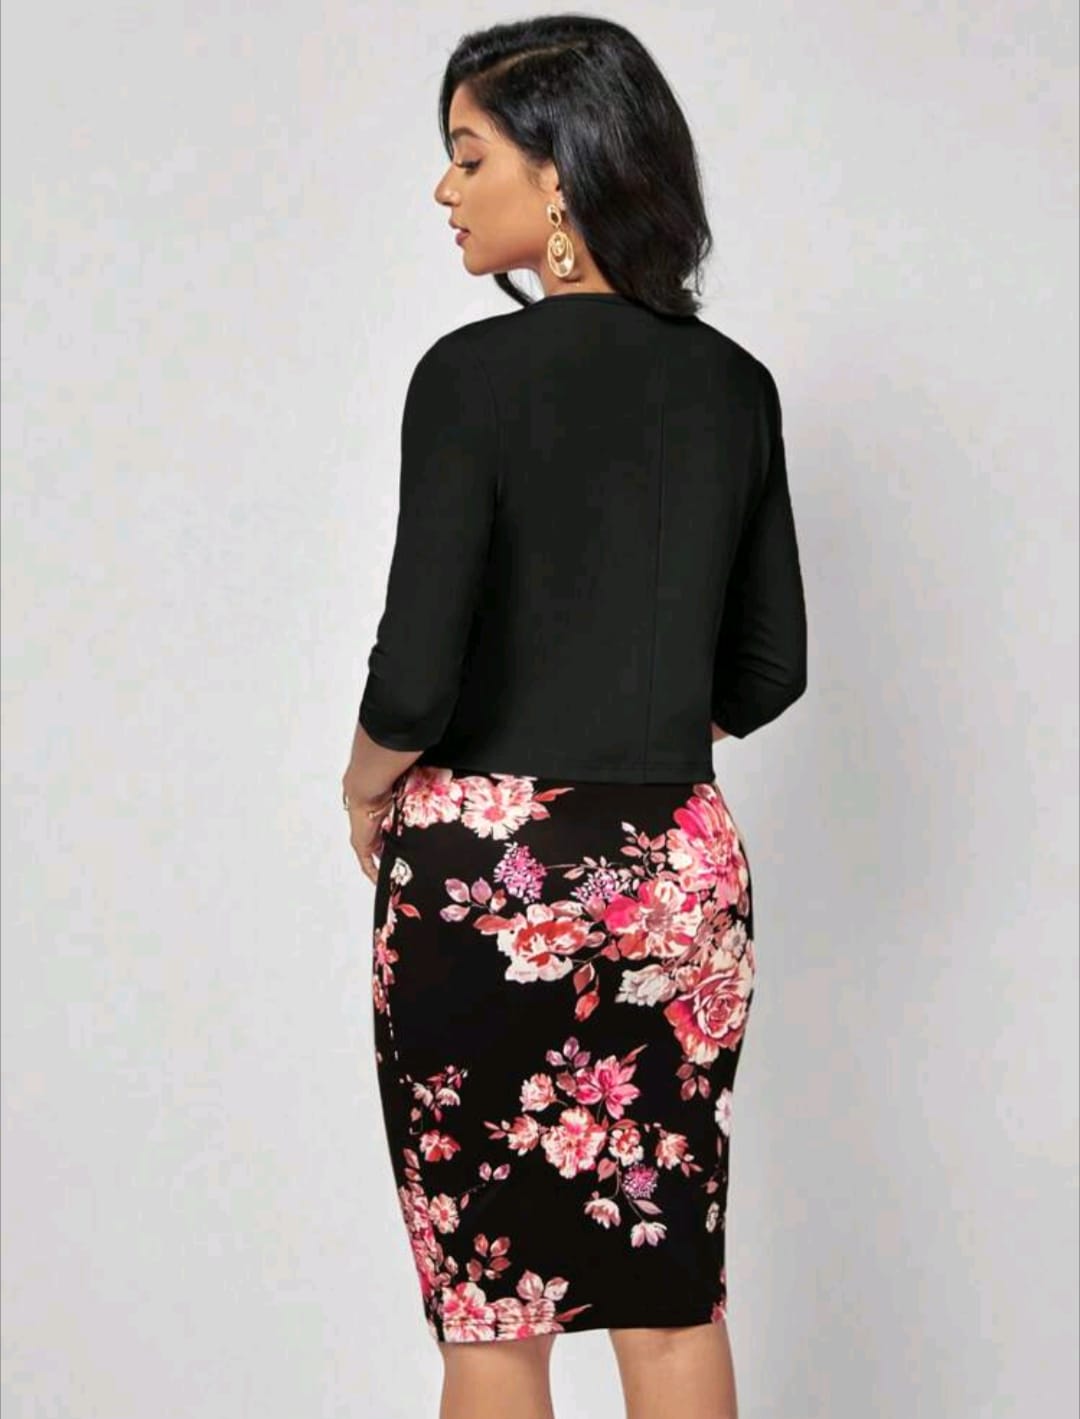 Floral Print Bodycon Dress & Open Front Jacket